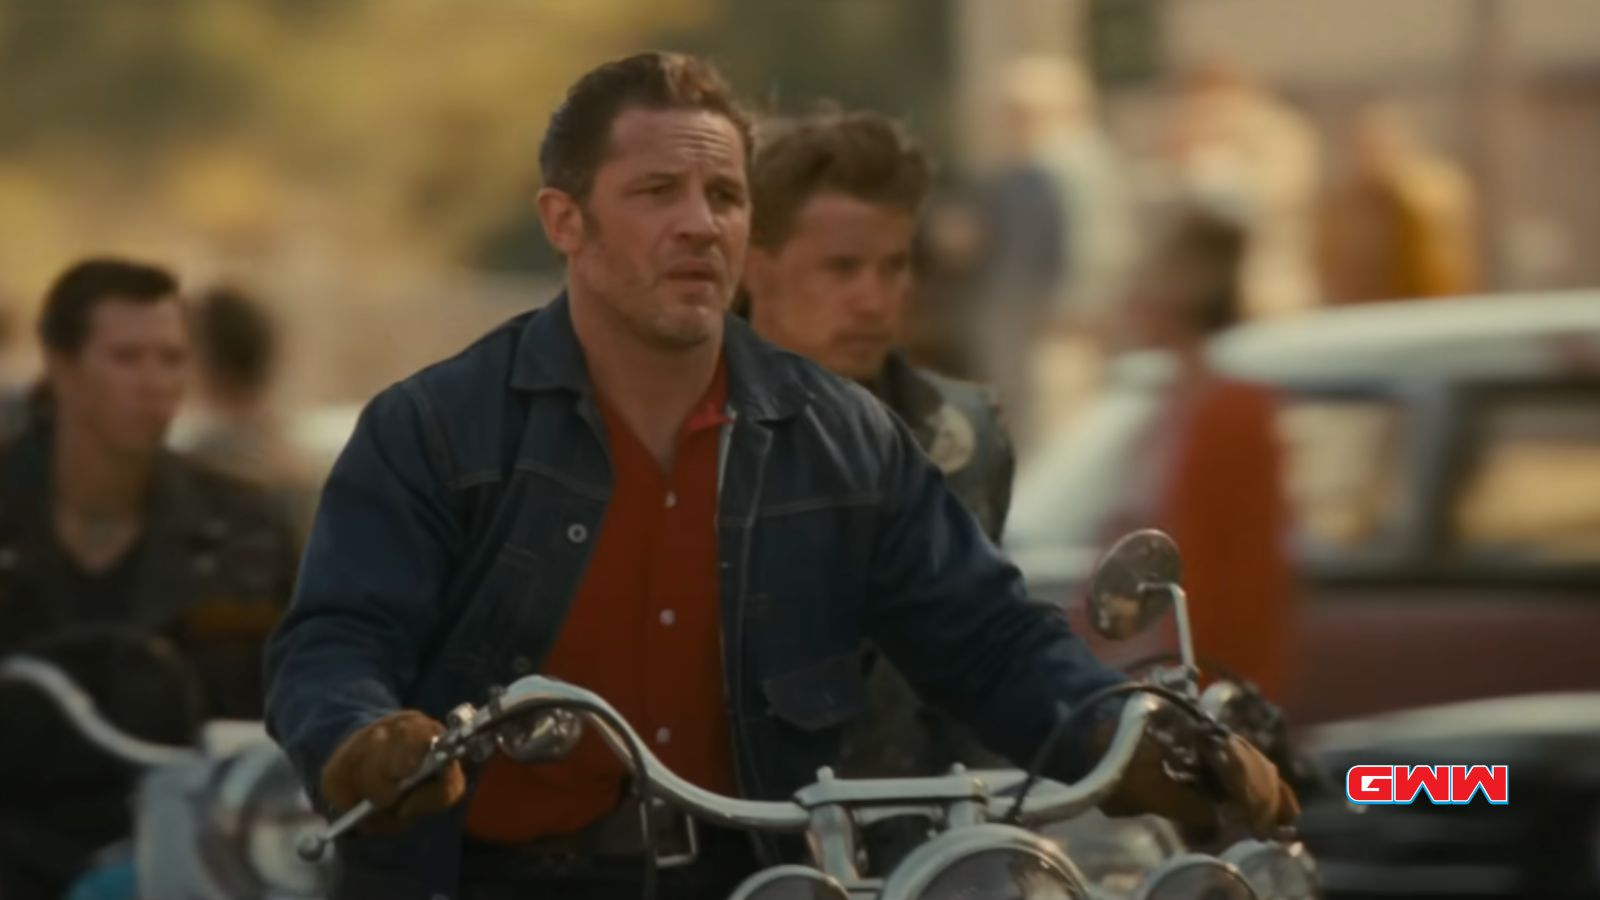 Johnny and Benny riding a motorcycle in a crowd, wearing a denim jacket.